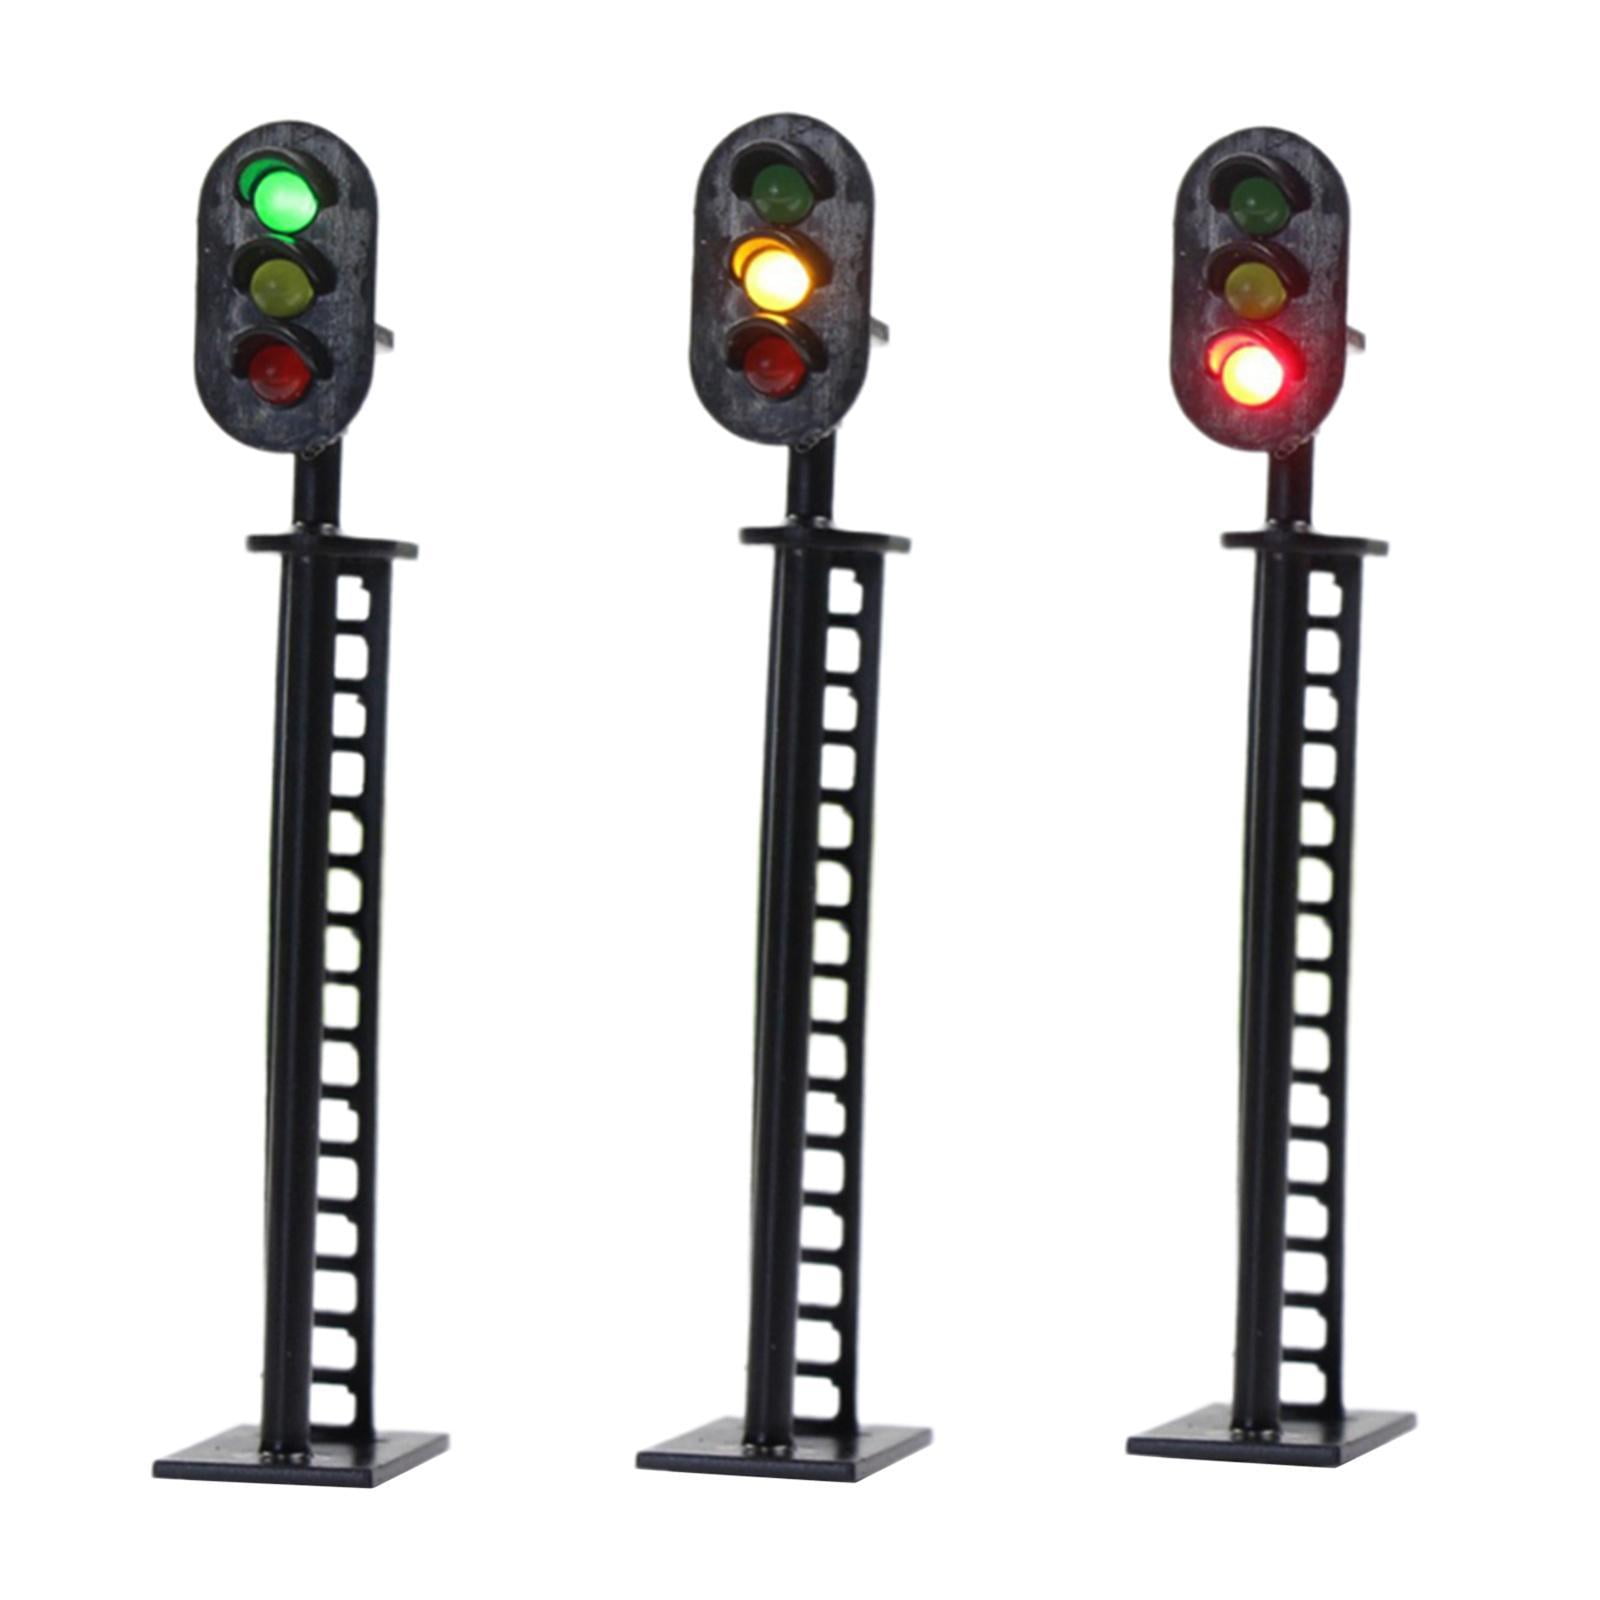 KATO 23-214 N Scale Traffic Signals and Signs Unitrack for sale online 